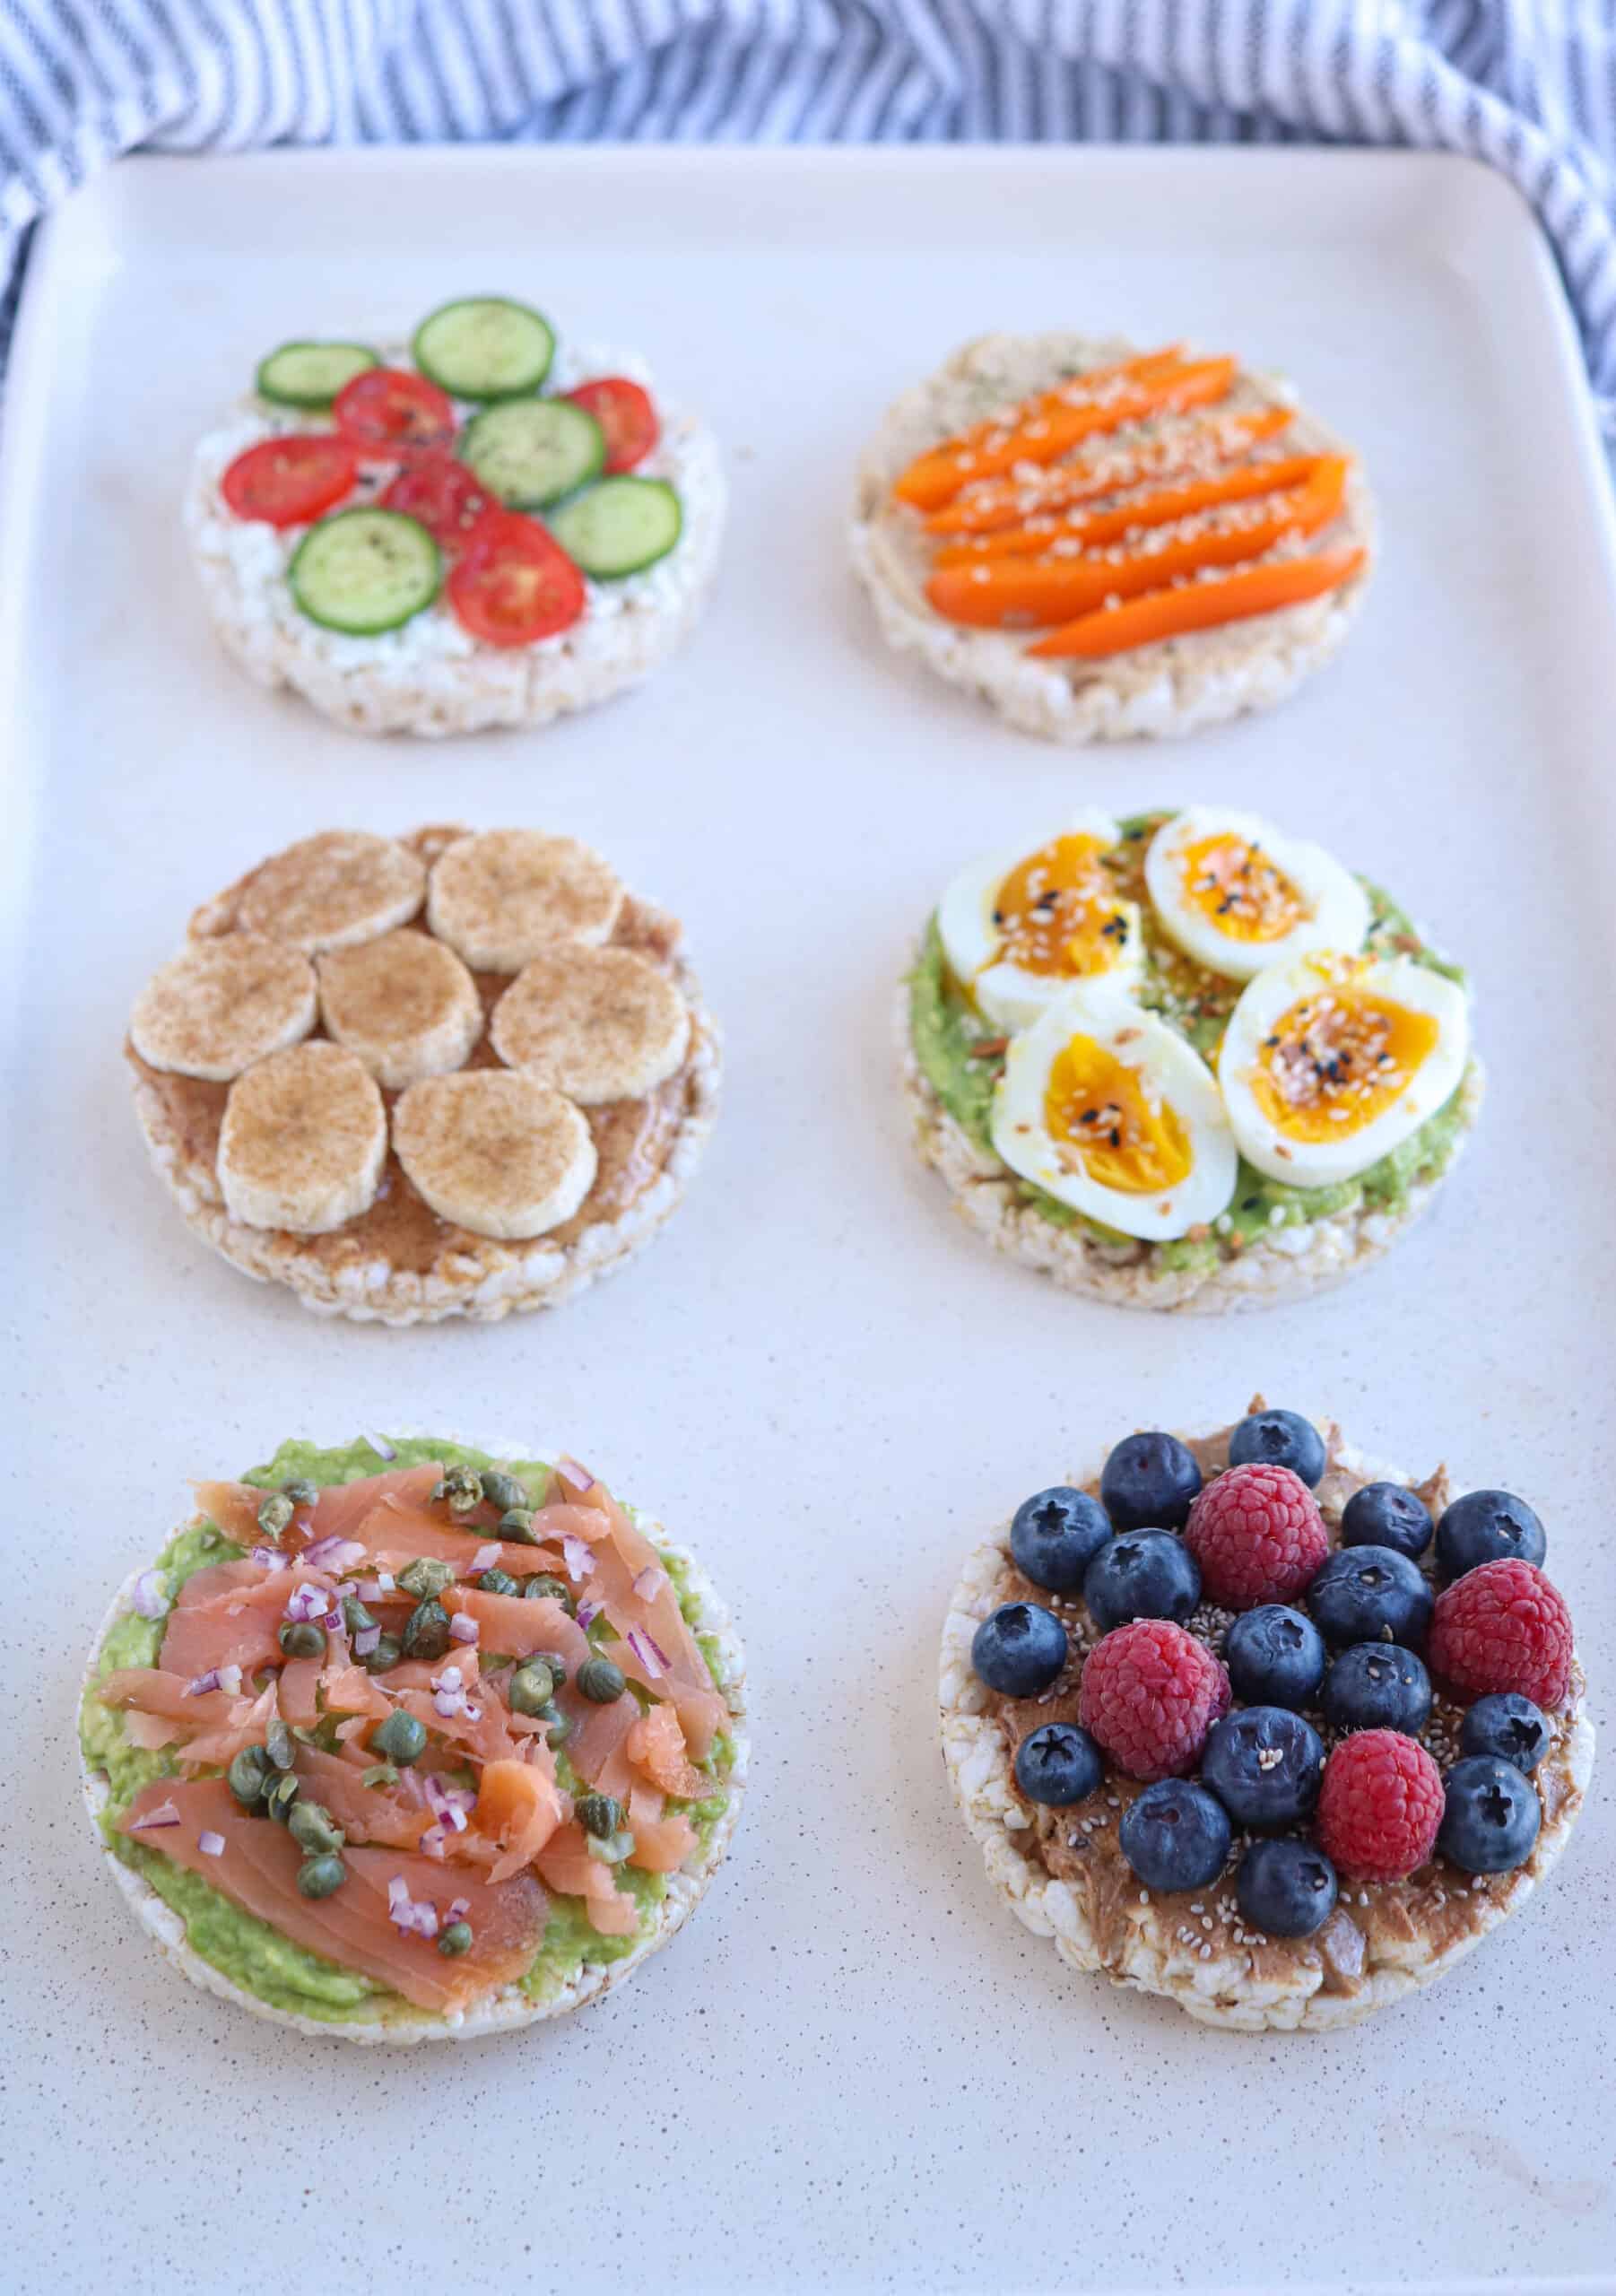 six different kinds of open face sandwiches on round rice cakes, sweet and savory.